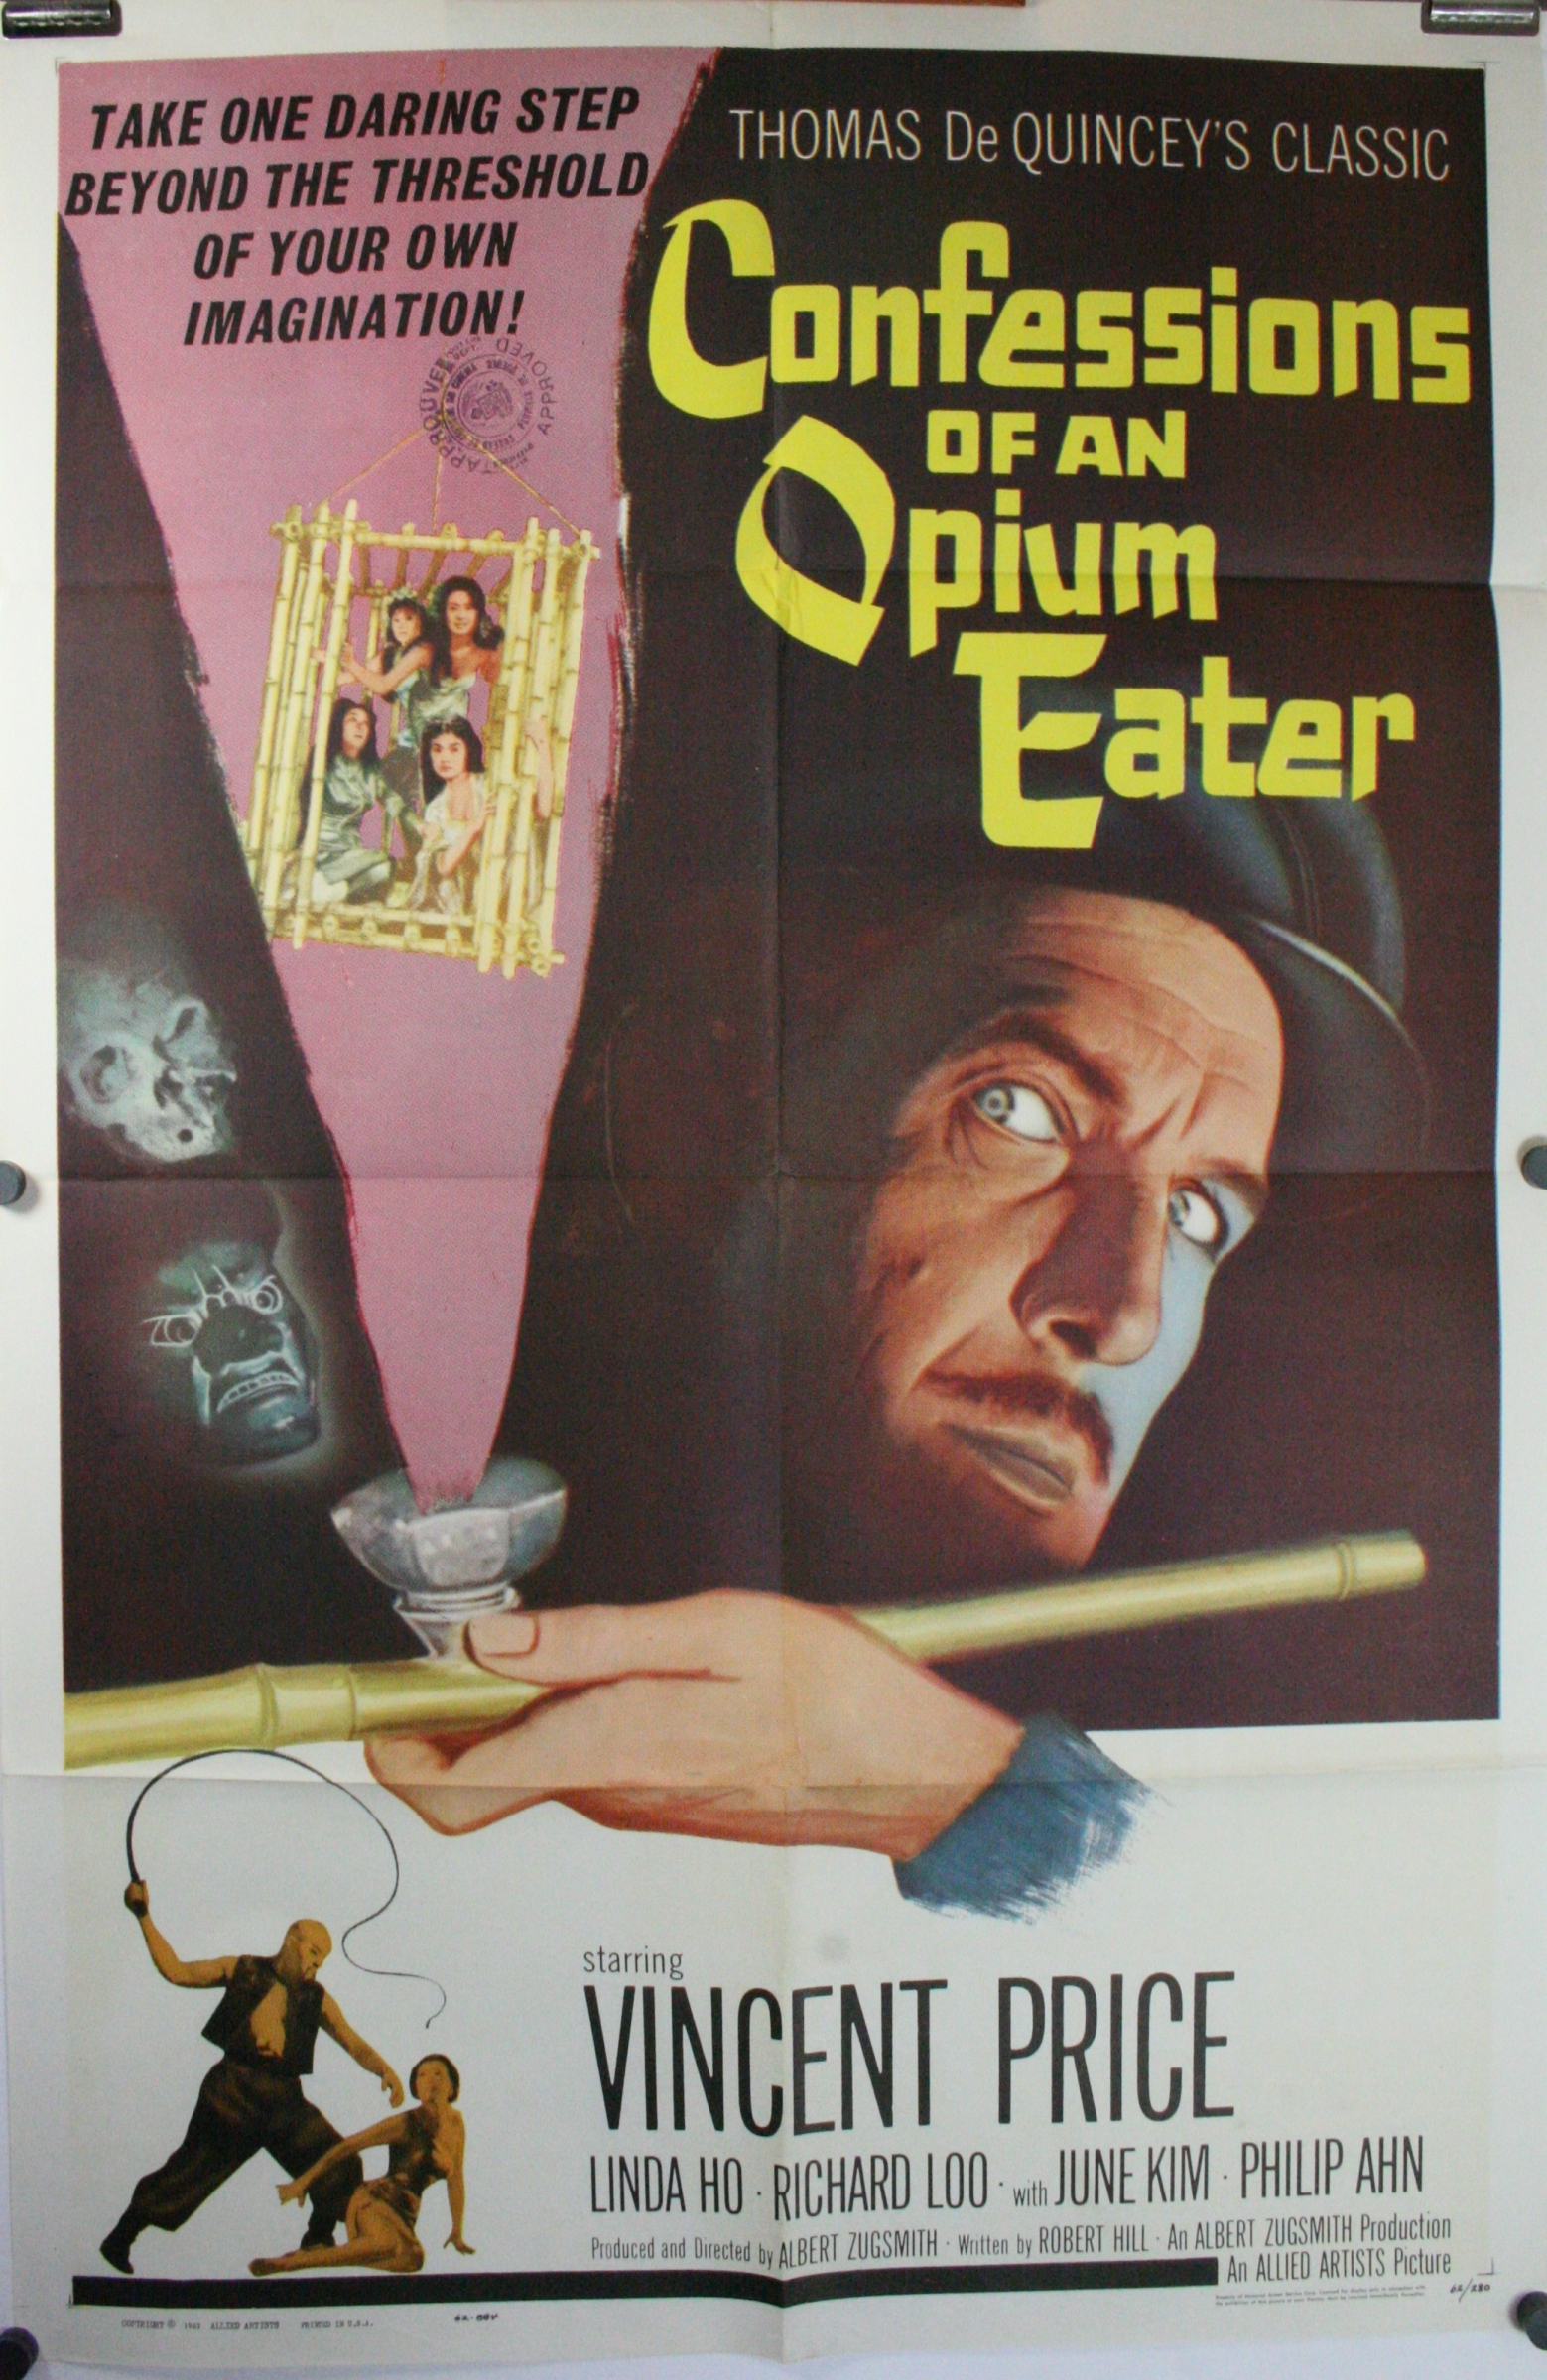 Confessions of an opium eater Vincent Price poster